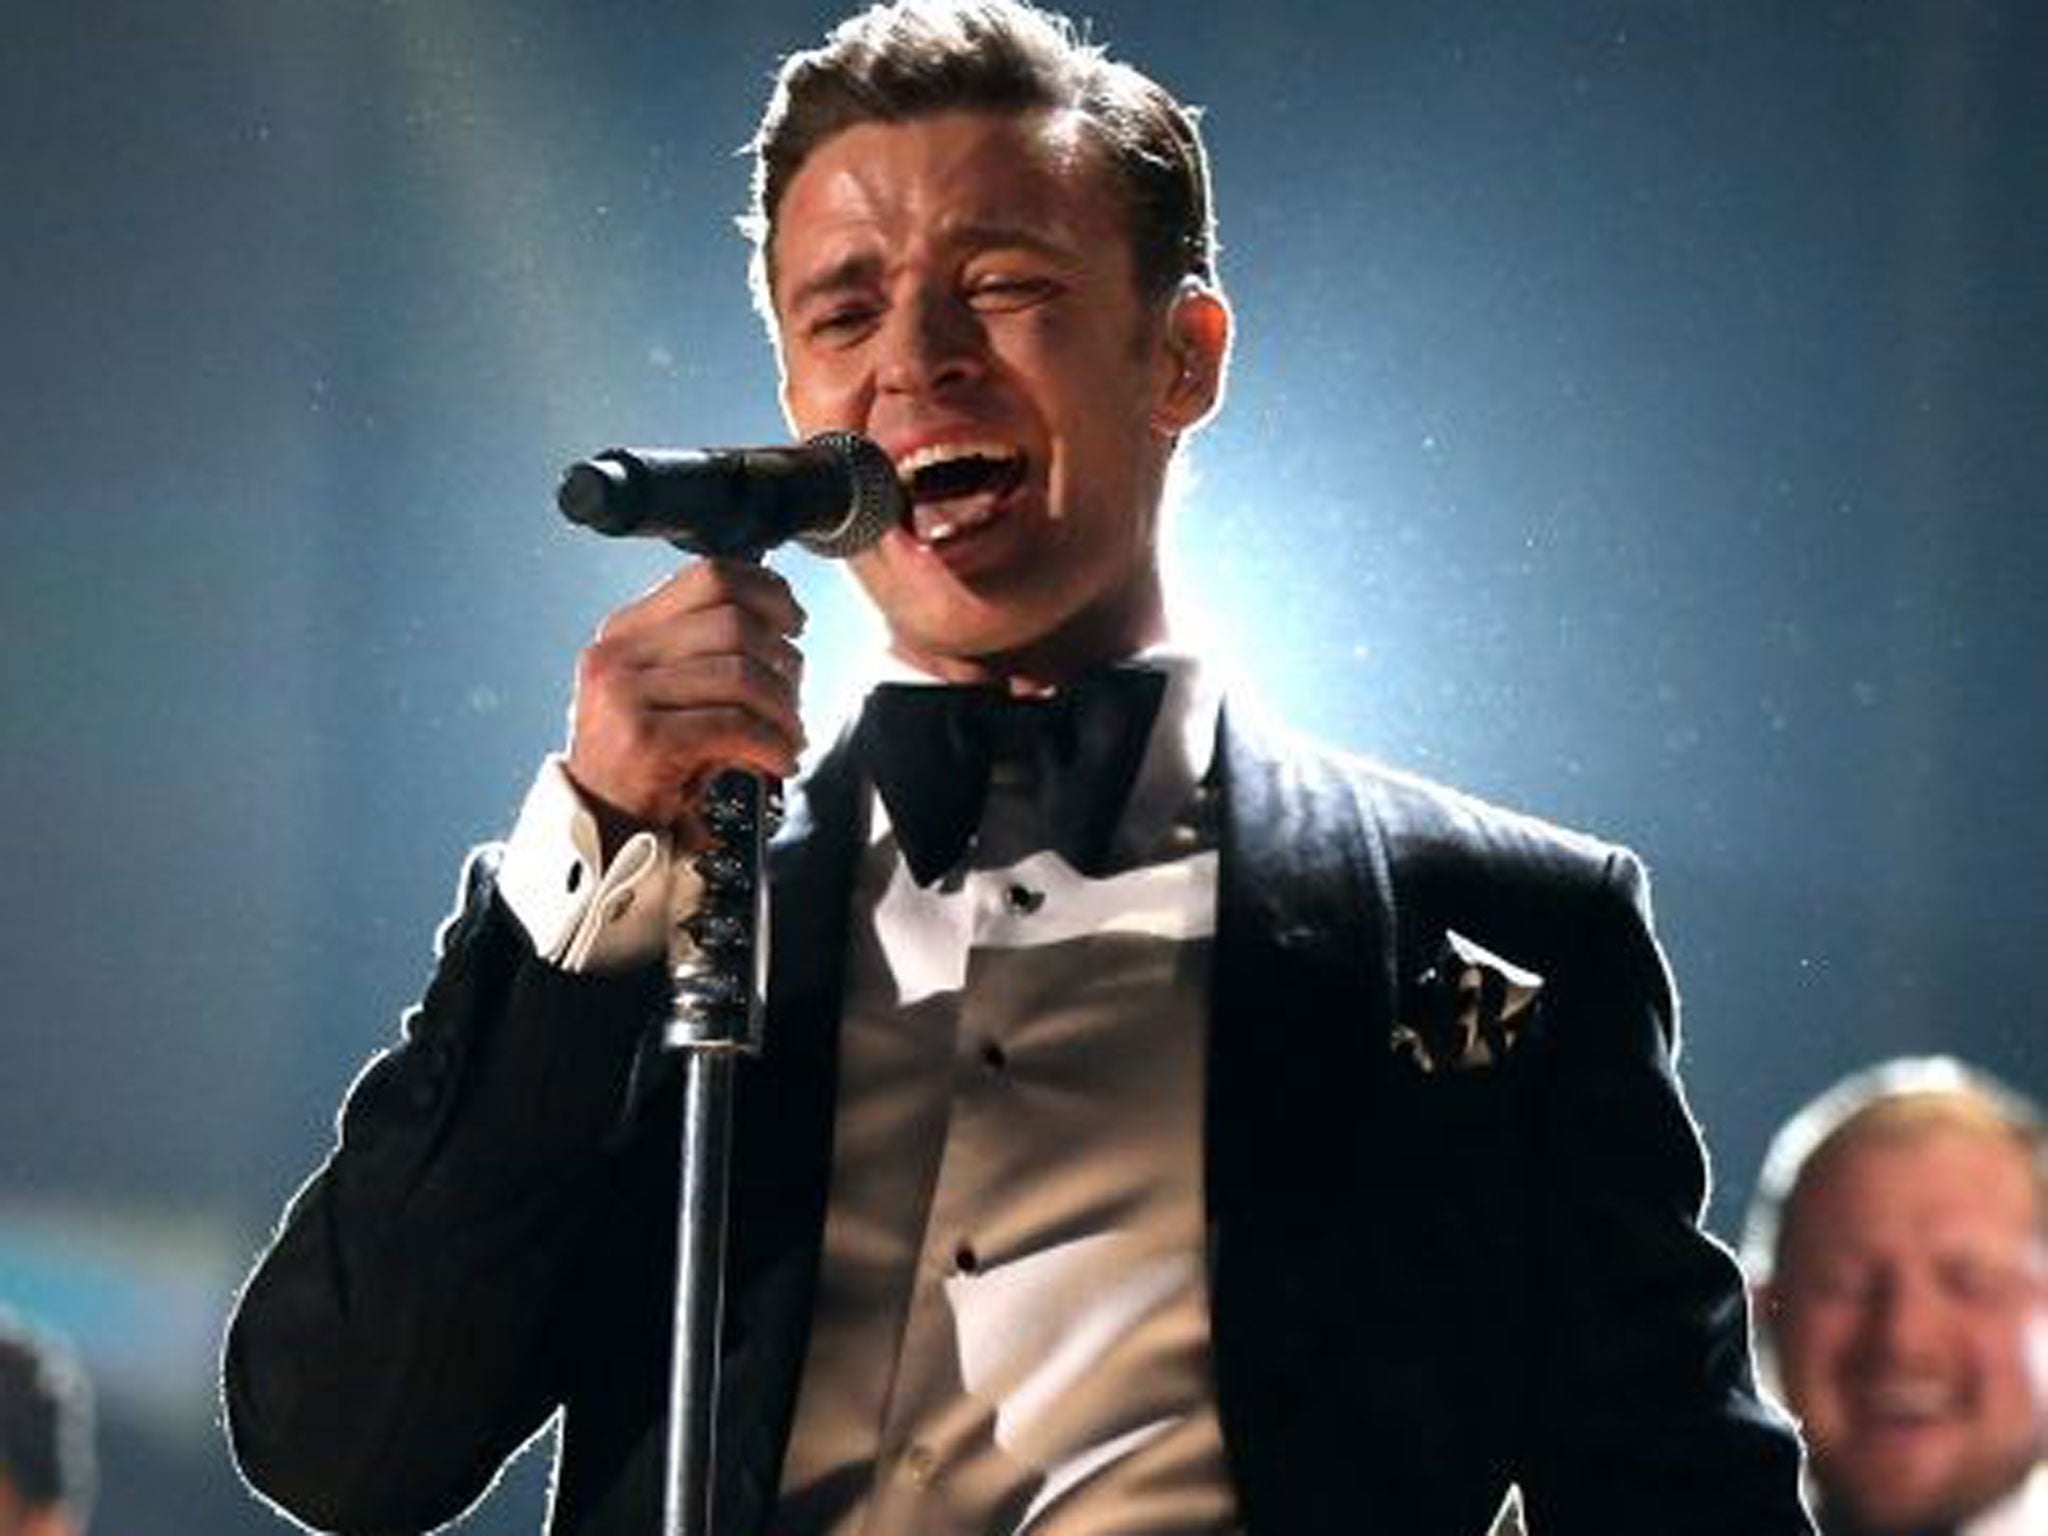 Justin Timberlake's back in the groove with some top tunes